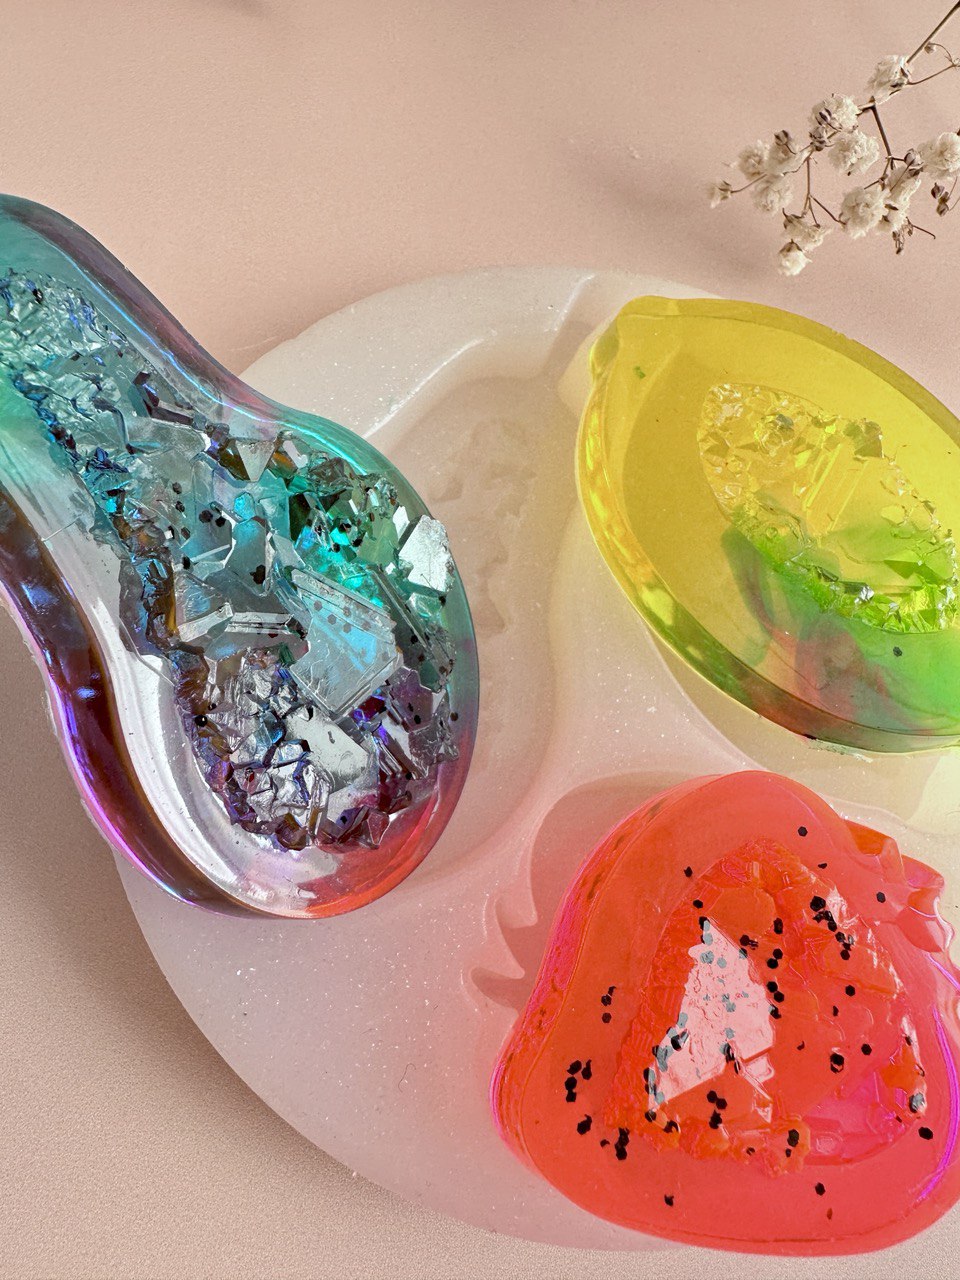 Mold Your Own Dazzling Crystal Fruits with Our 3-Piece Druzy Silicone Mold Set